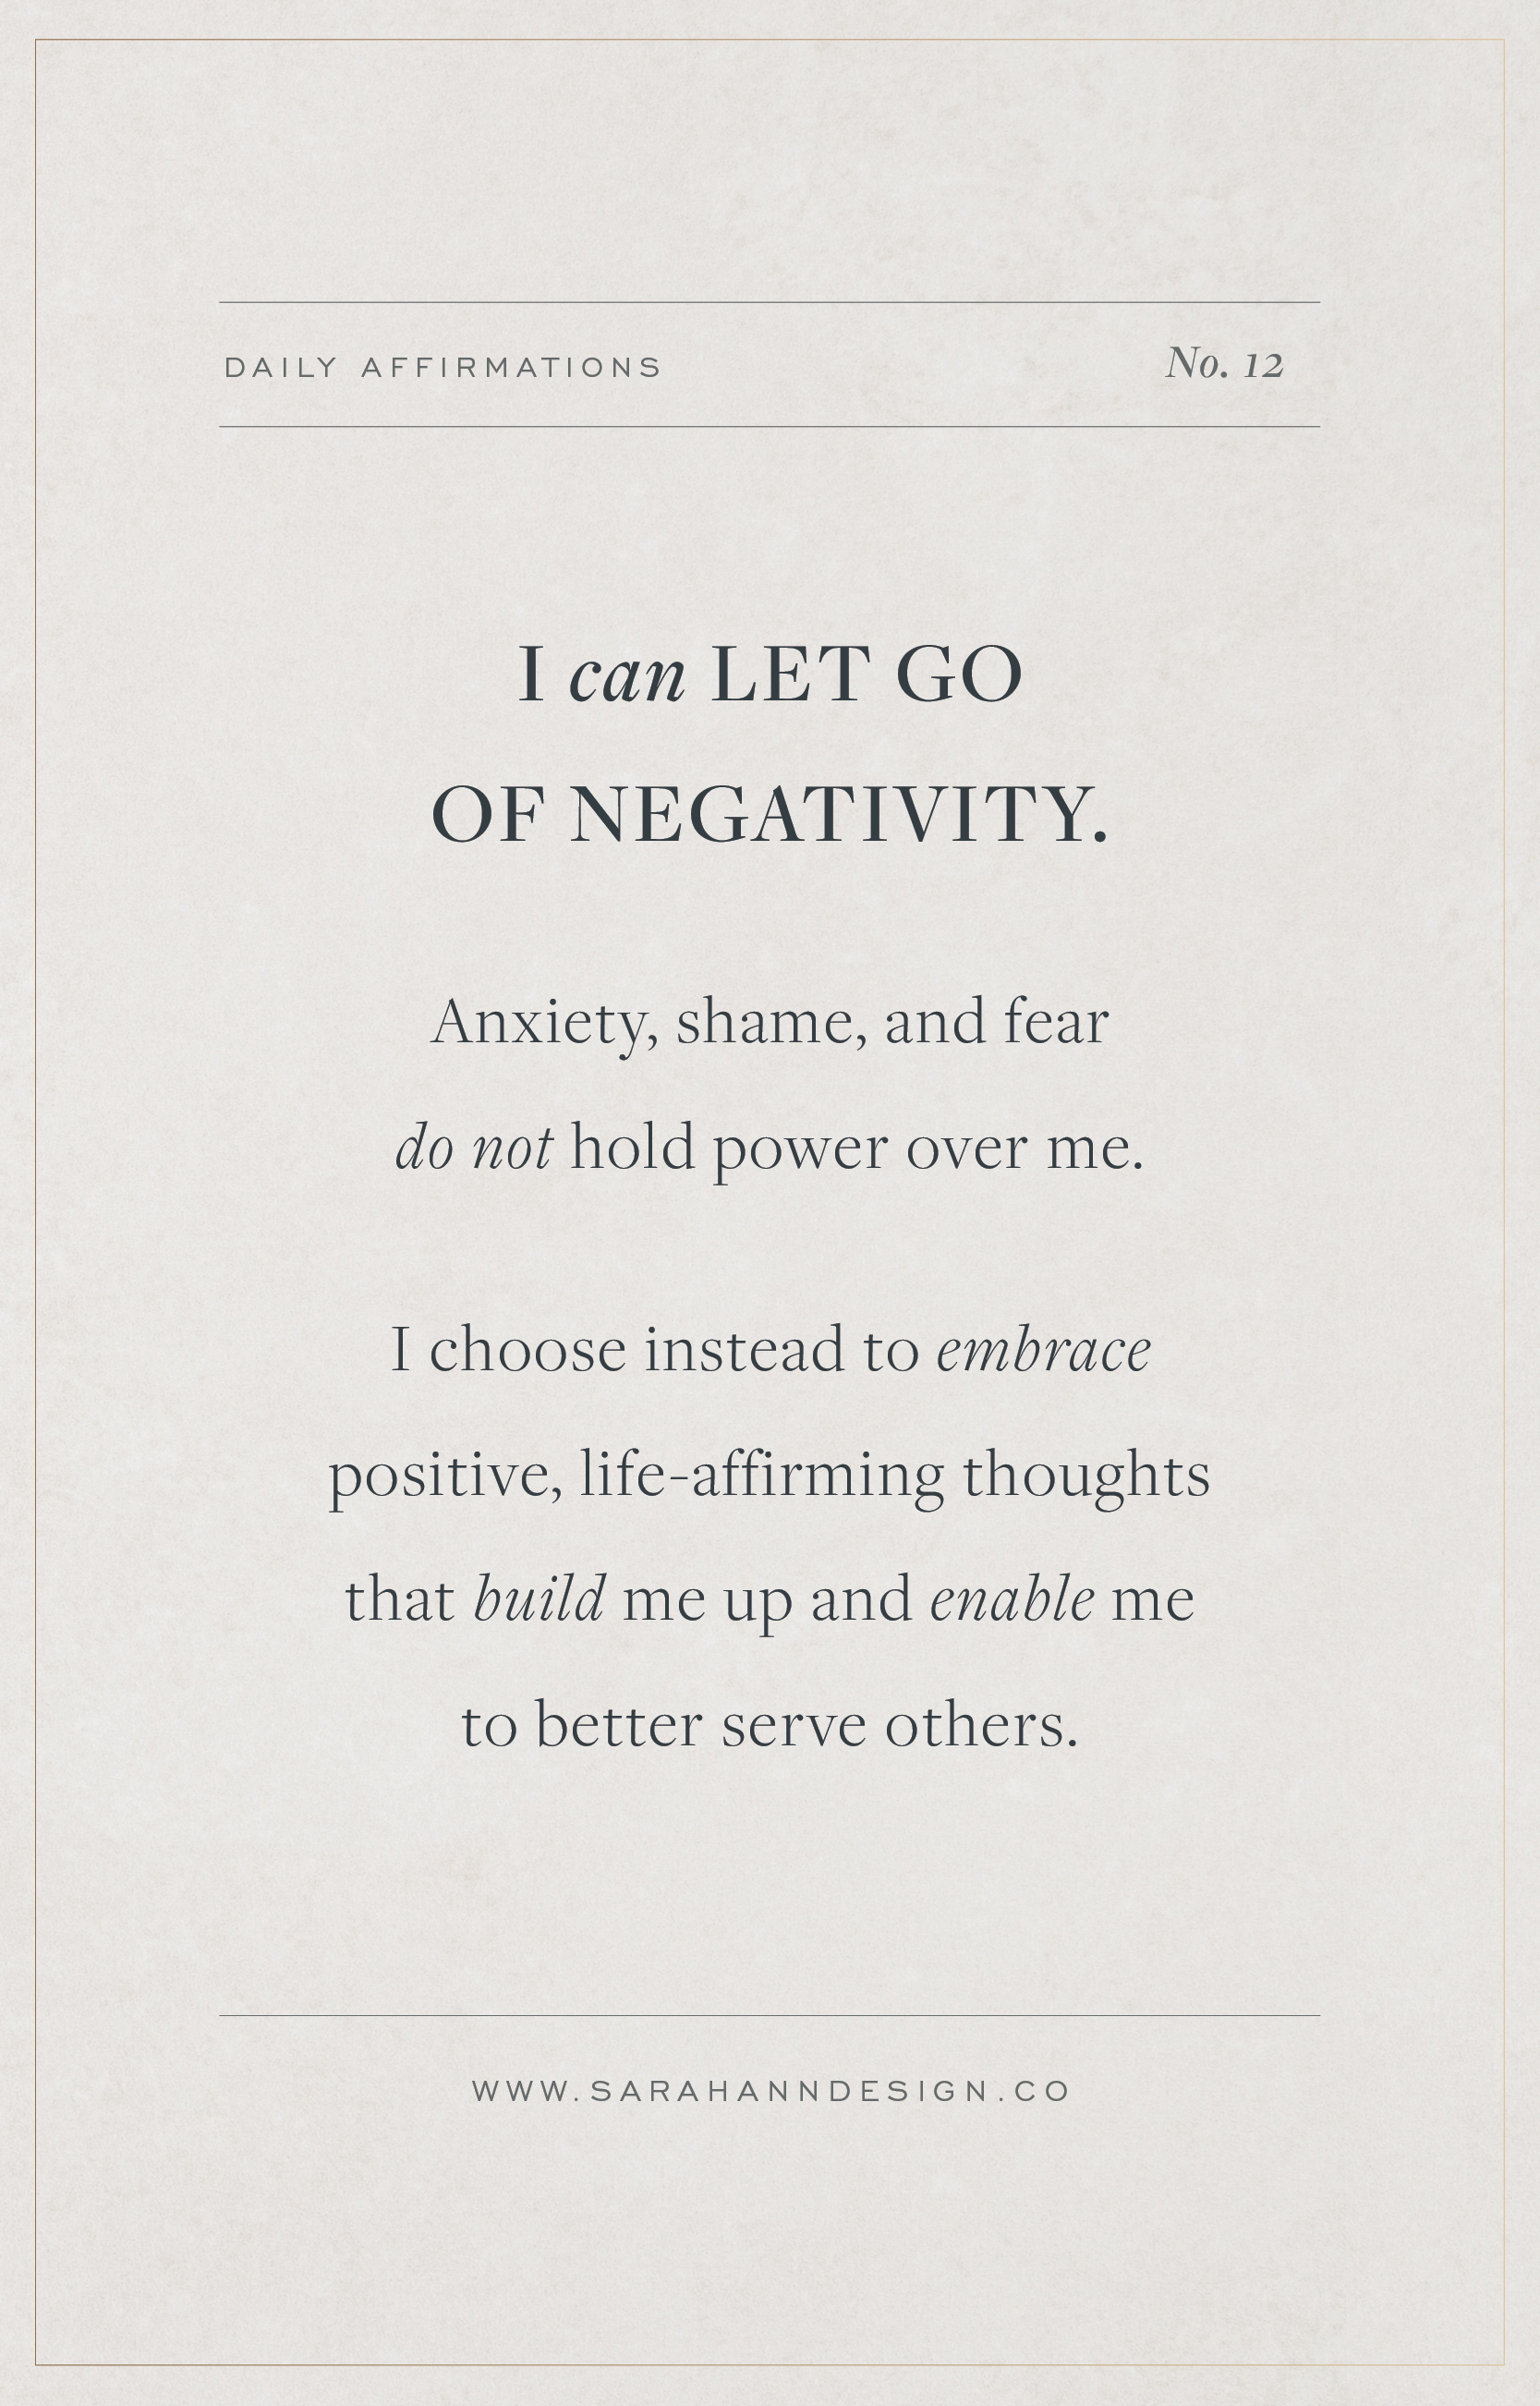 Affirmations for Creatives // 23 Daily Affirmations for Creative ...